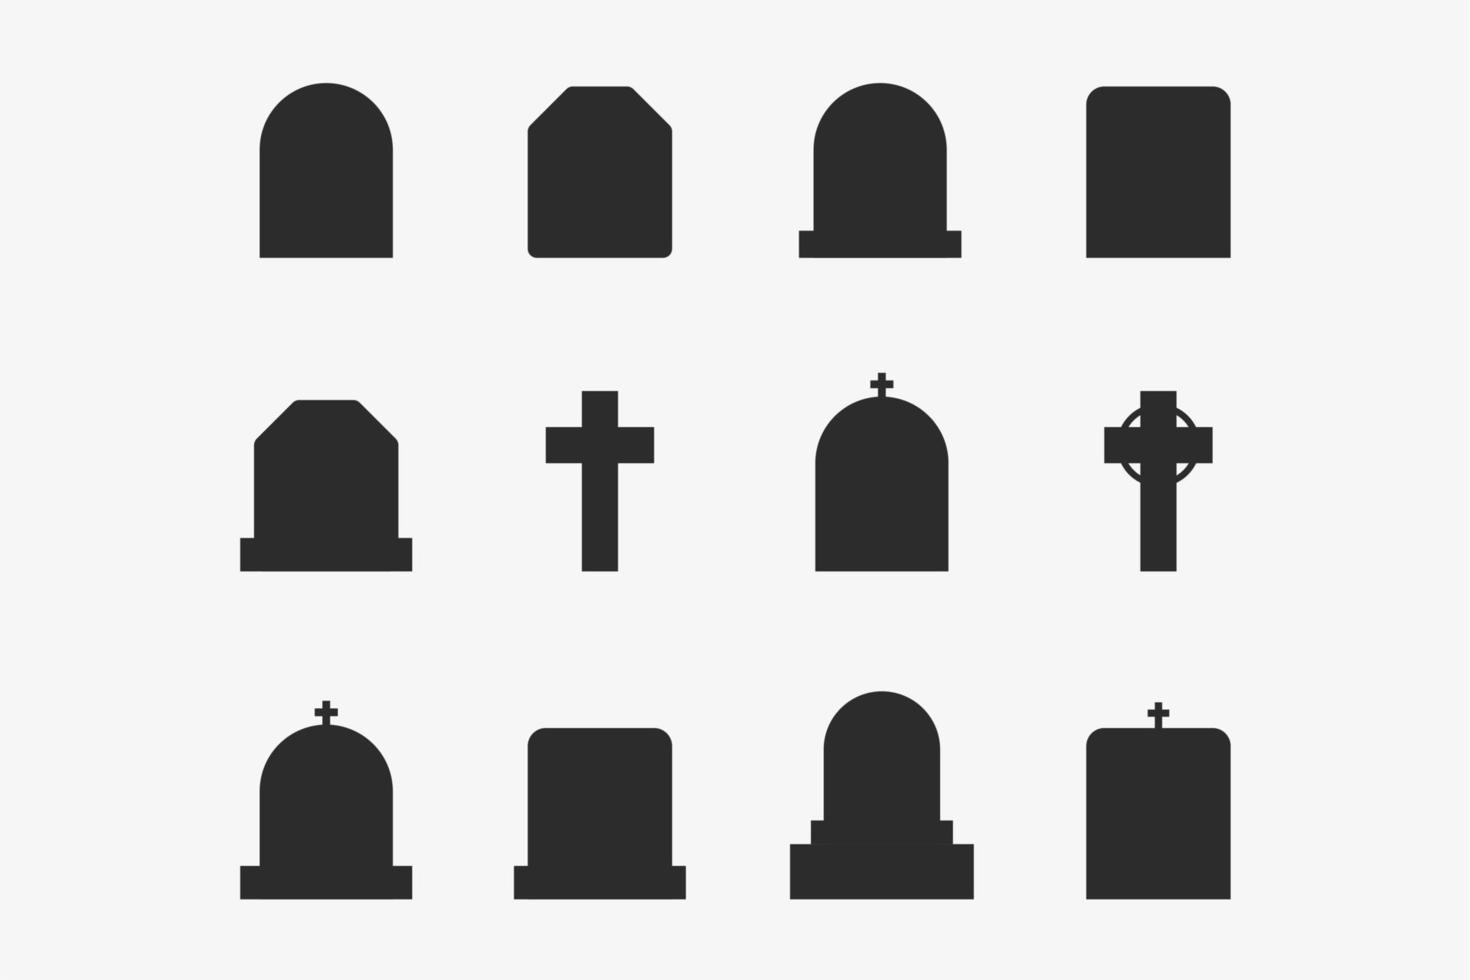 tombstone silhouette icon set suitable for halloween and other design elements isolated on white background vector